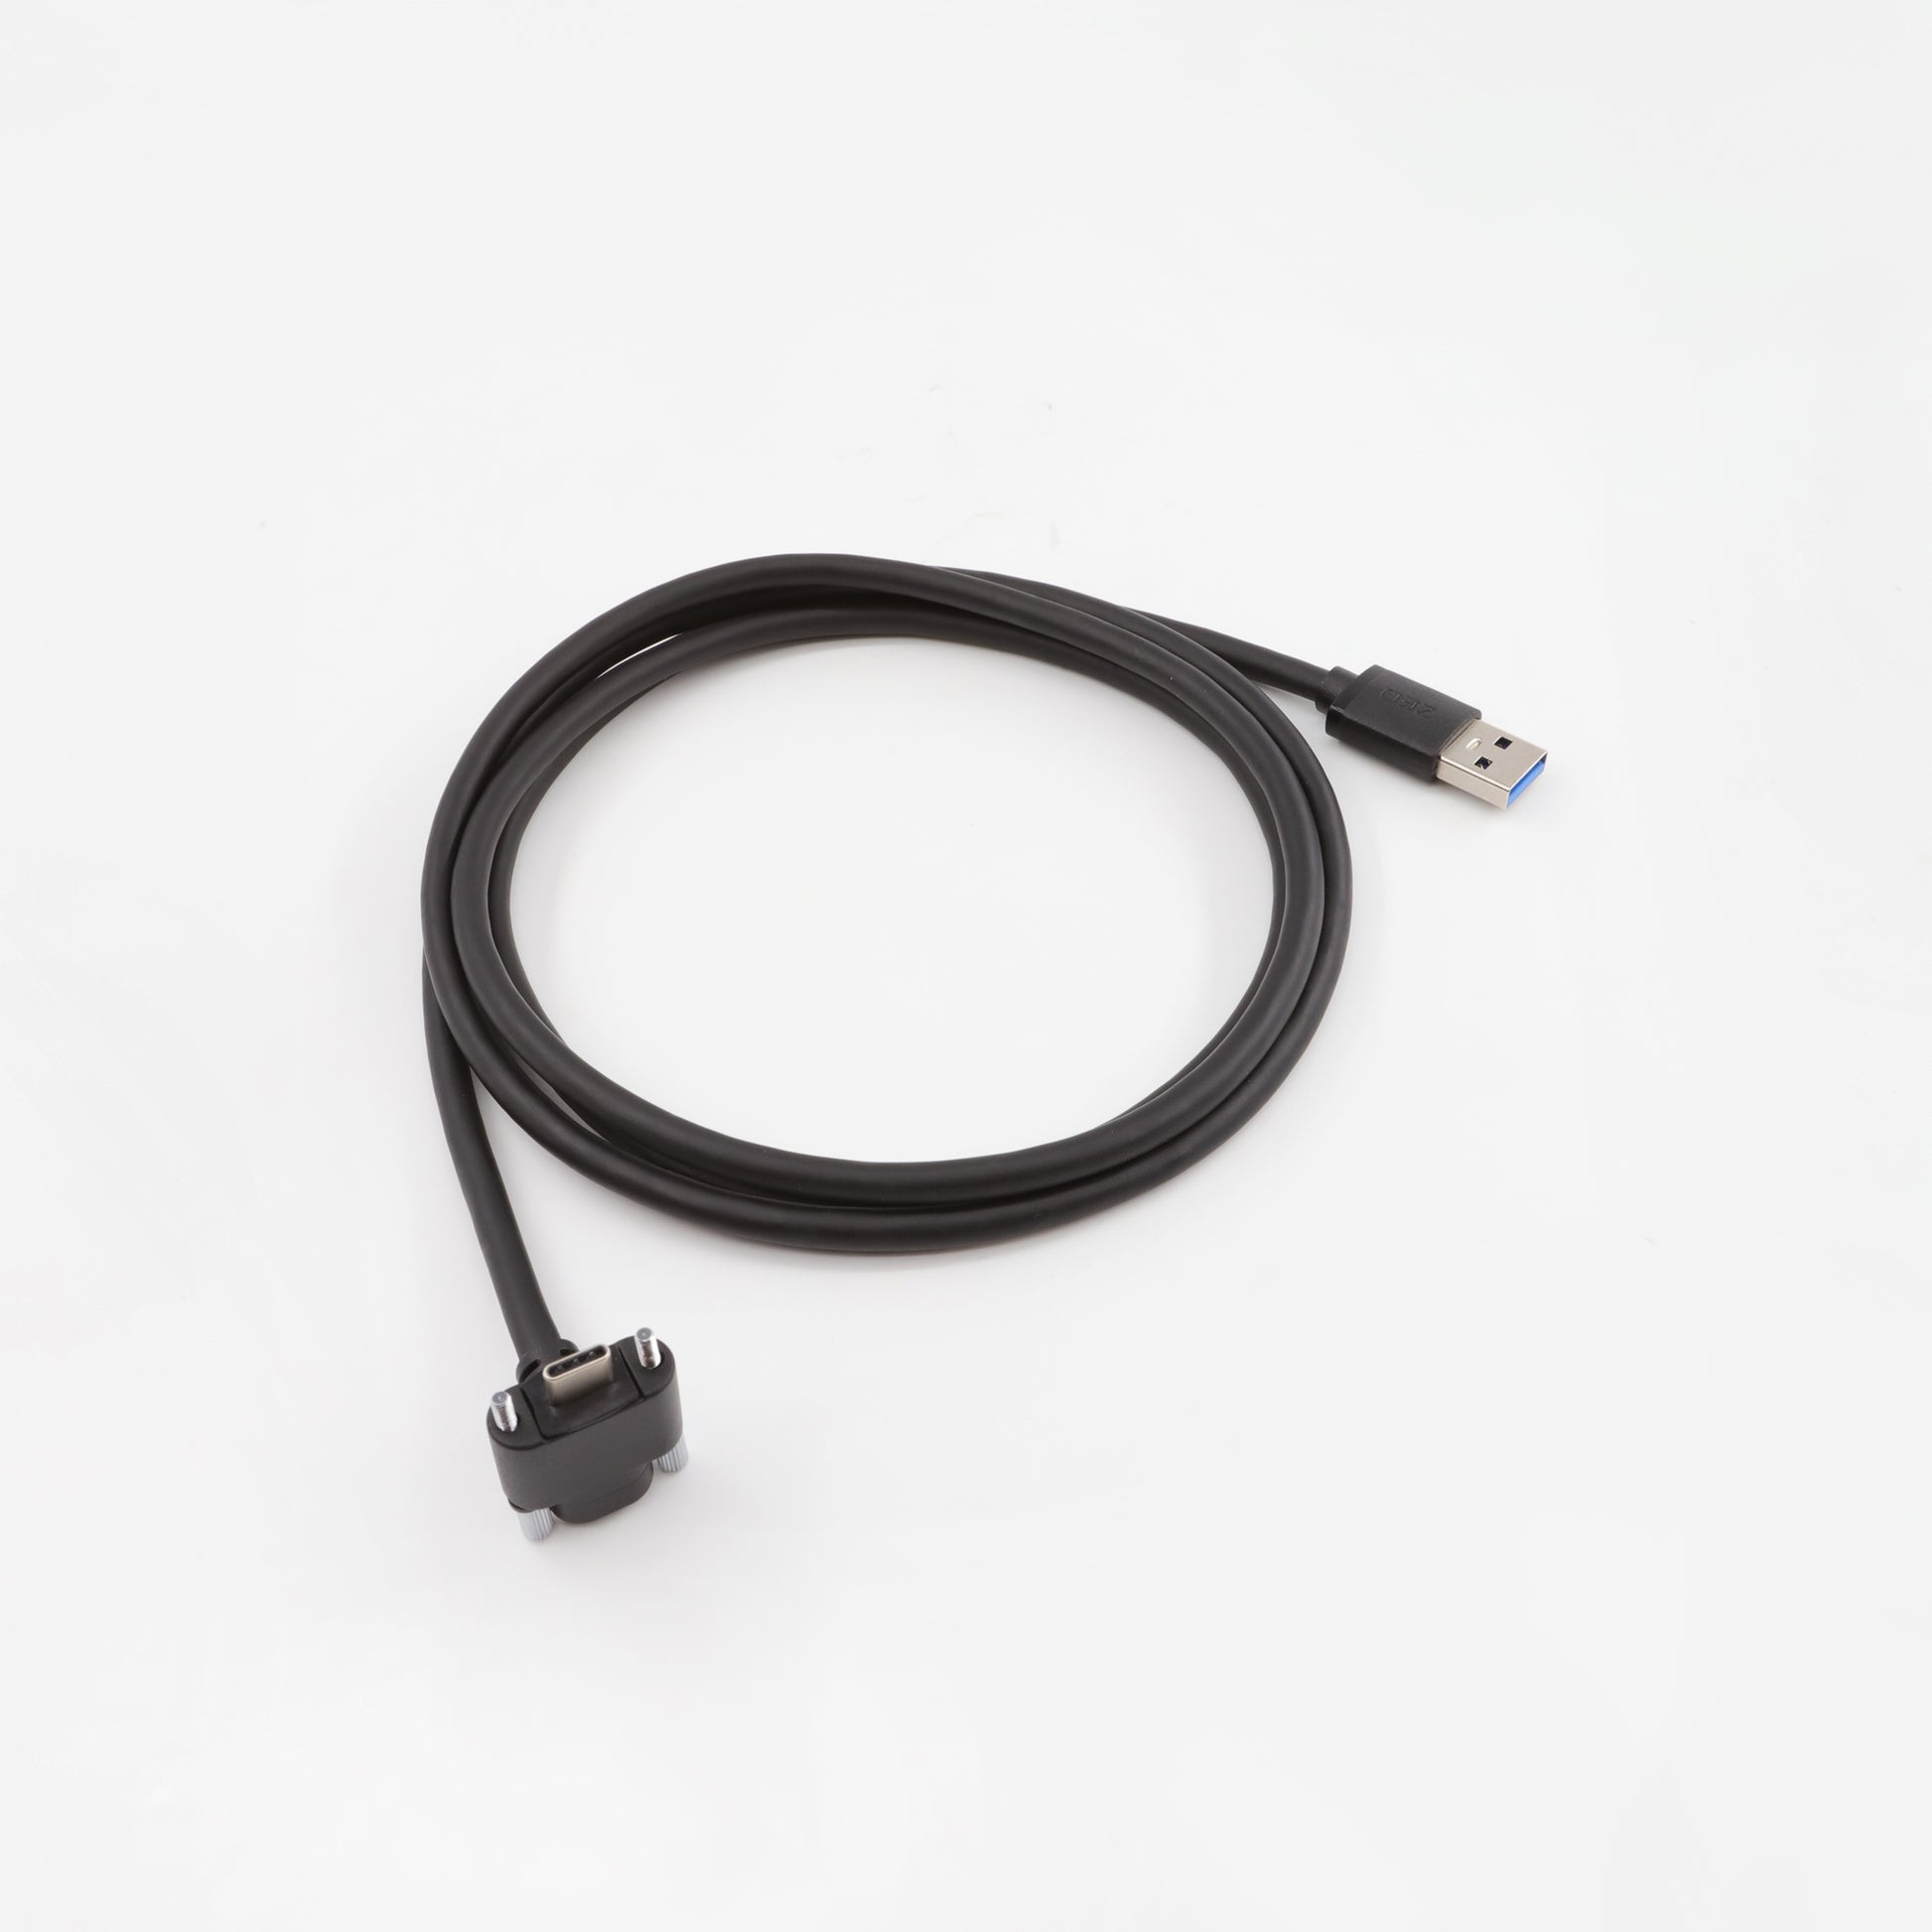 16ft (5m) USB 3.2 Gen 1 Type-A to C Dual Screw Lock Active Extension Cable  Vision Compliant